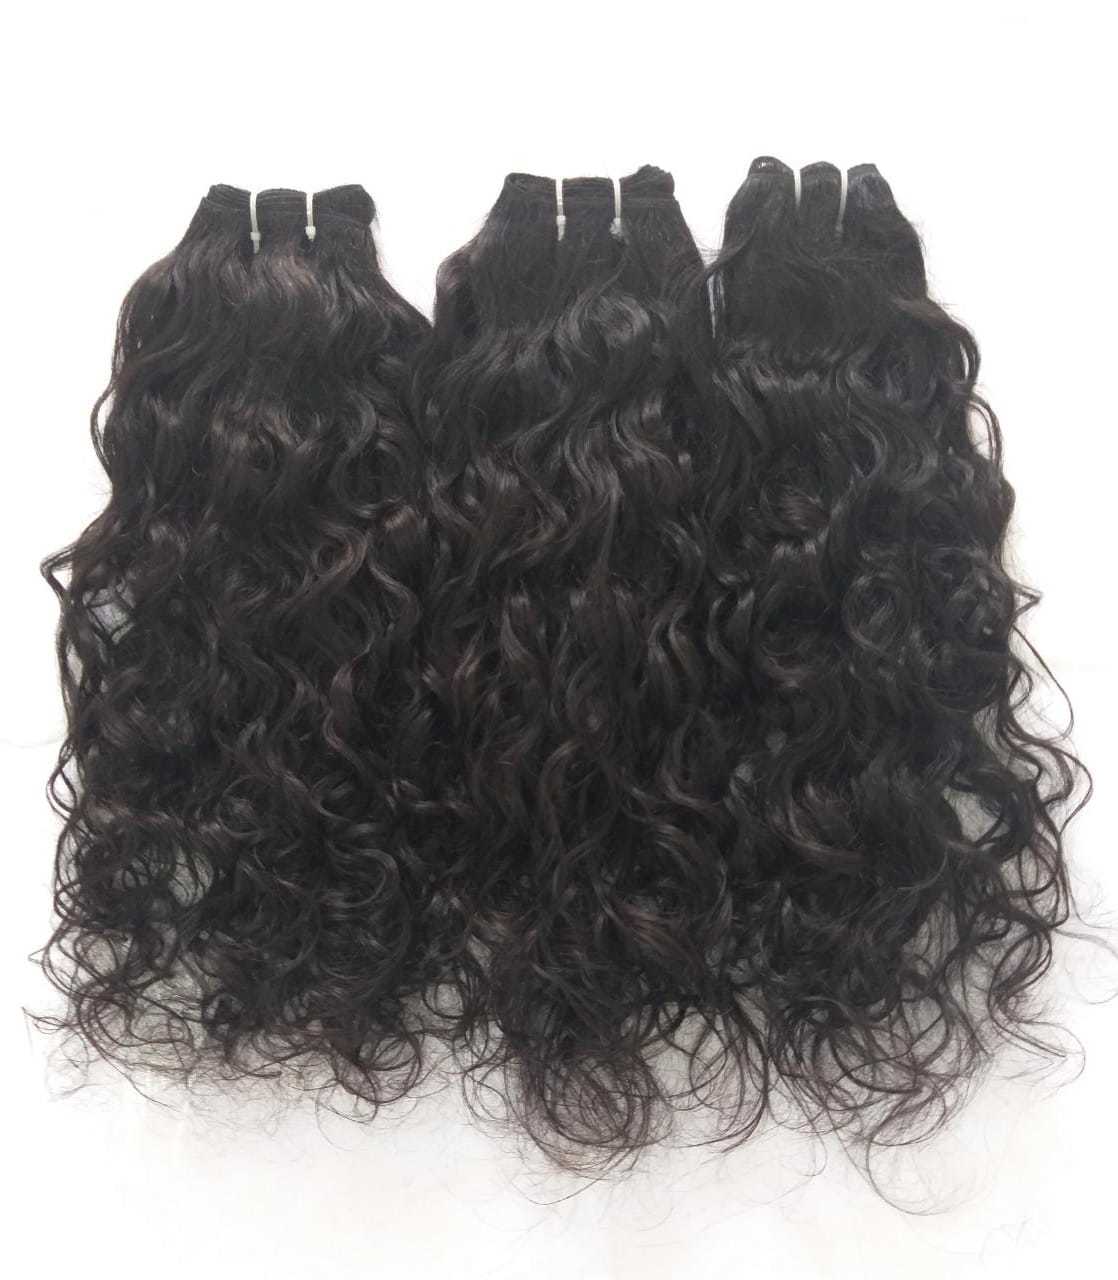 Cuticle Aligned Deep Curly Peruvian Human Hair , Remy Curly Hair